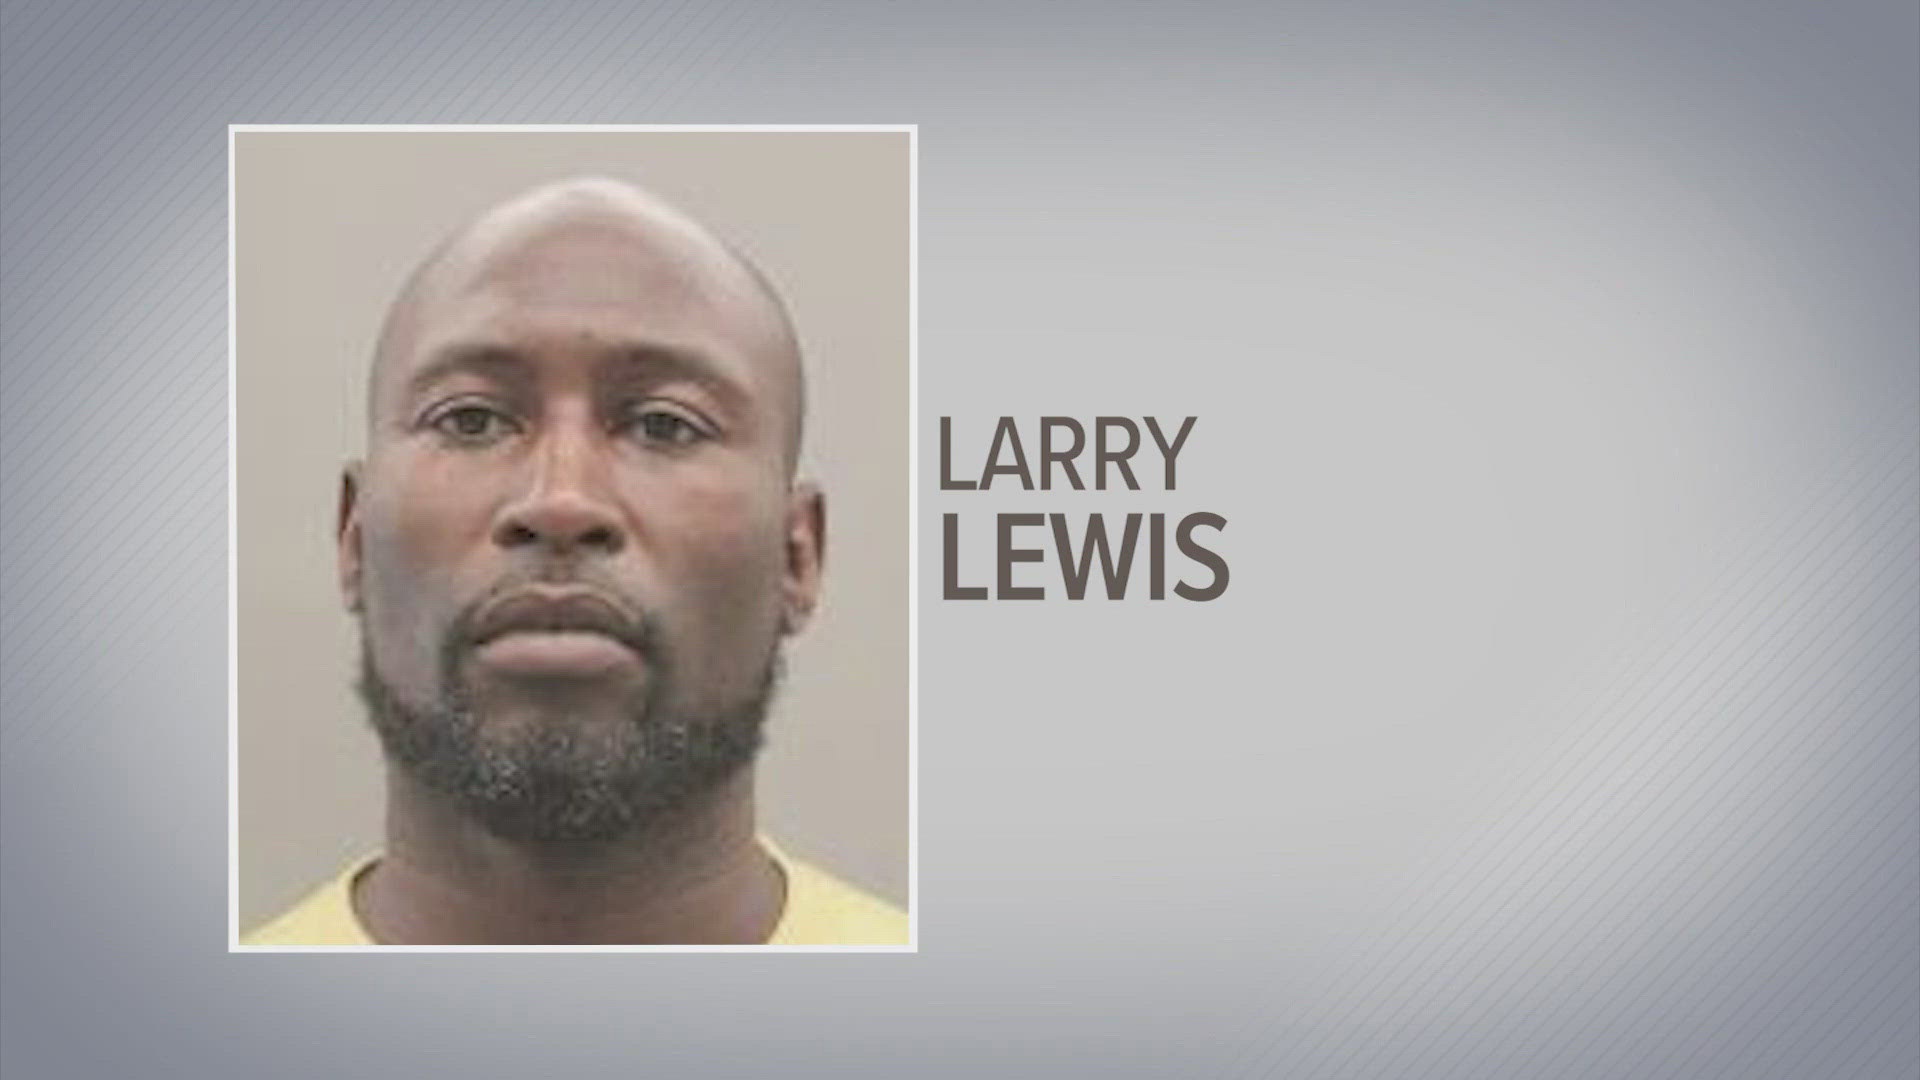 Larry Lewis, 48, was convicted of using physical force to coerce four women into prostitution on Bissonnet Street, as well as in other Texas and Louisiana cities.